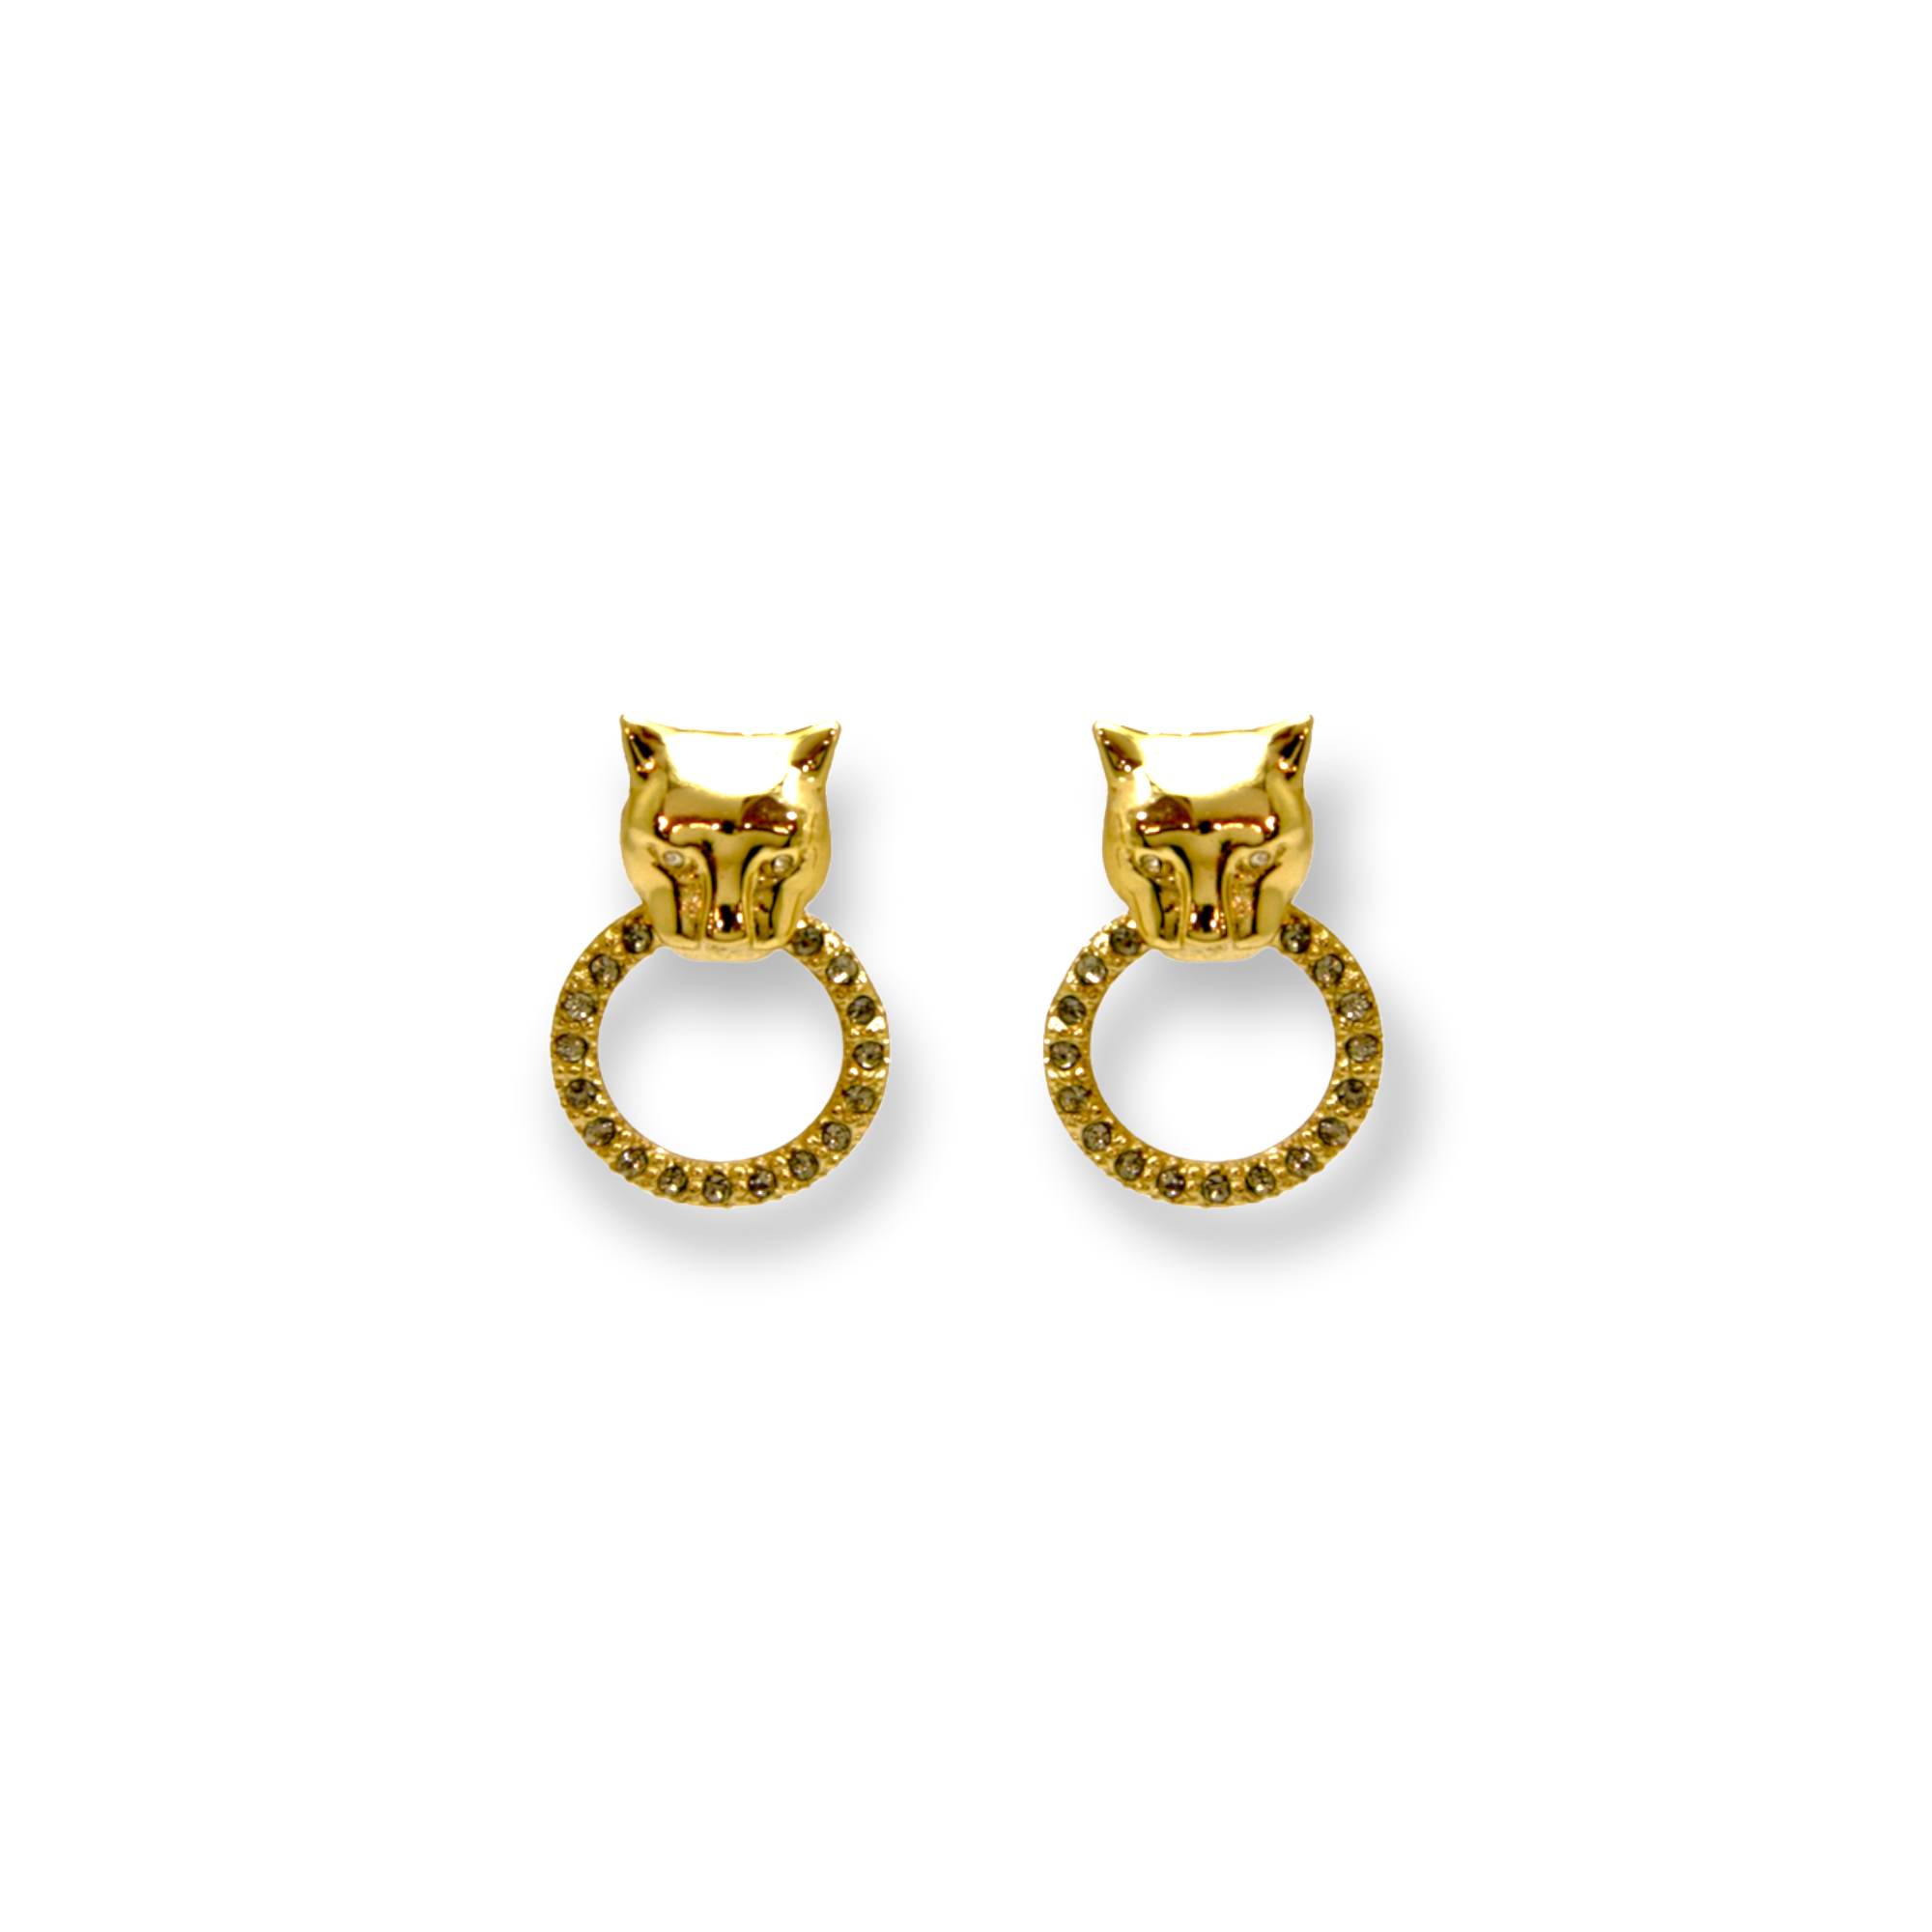 GOLD PANTHER EARRINGS MICRO